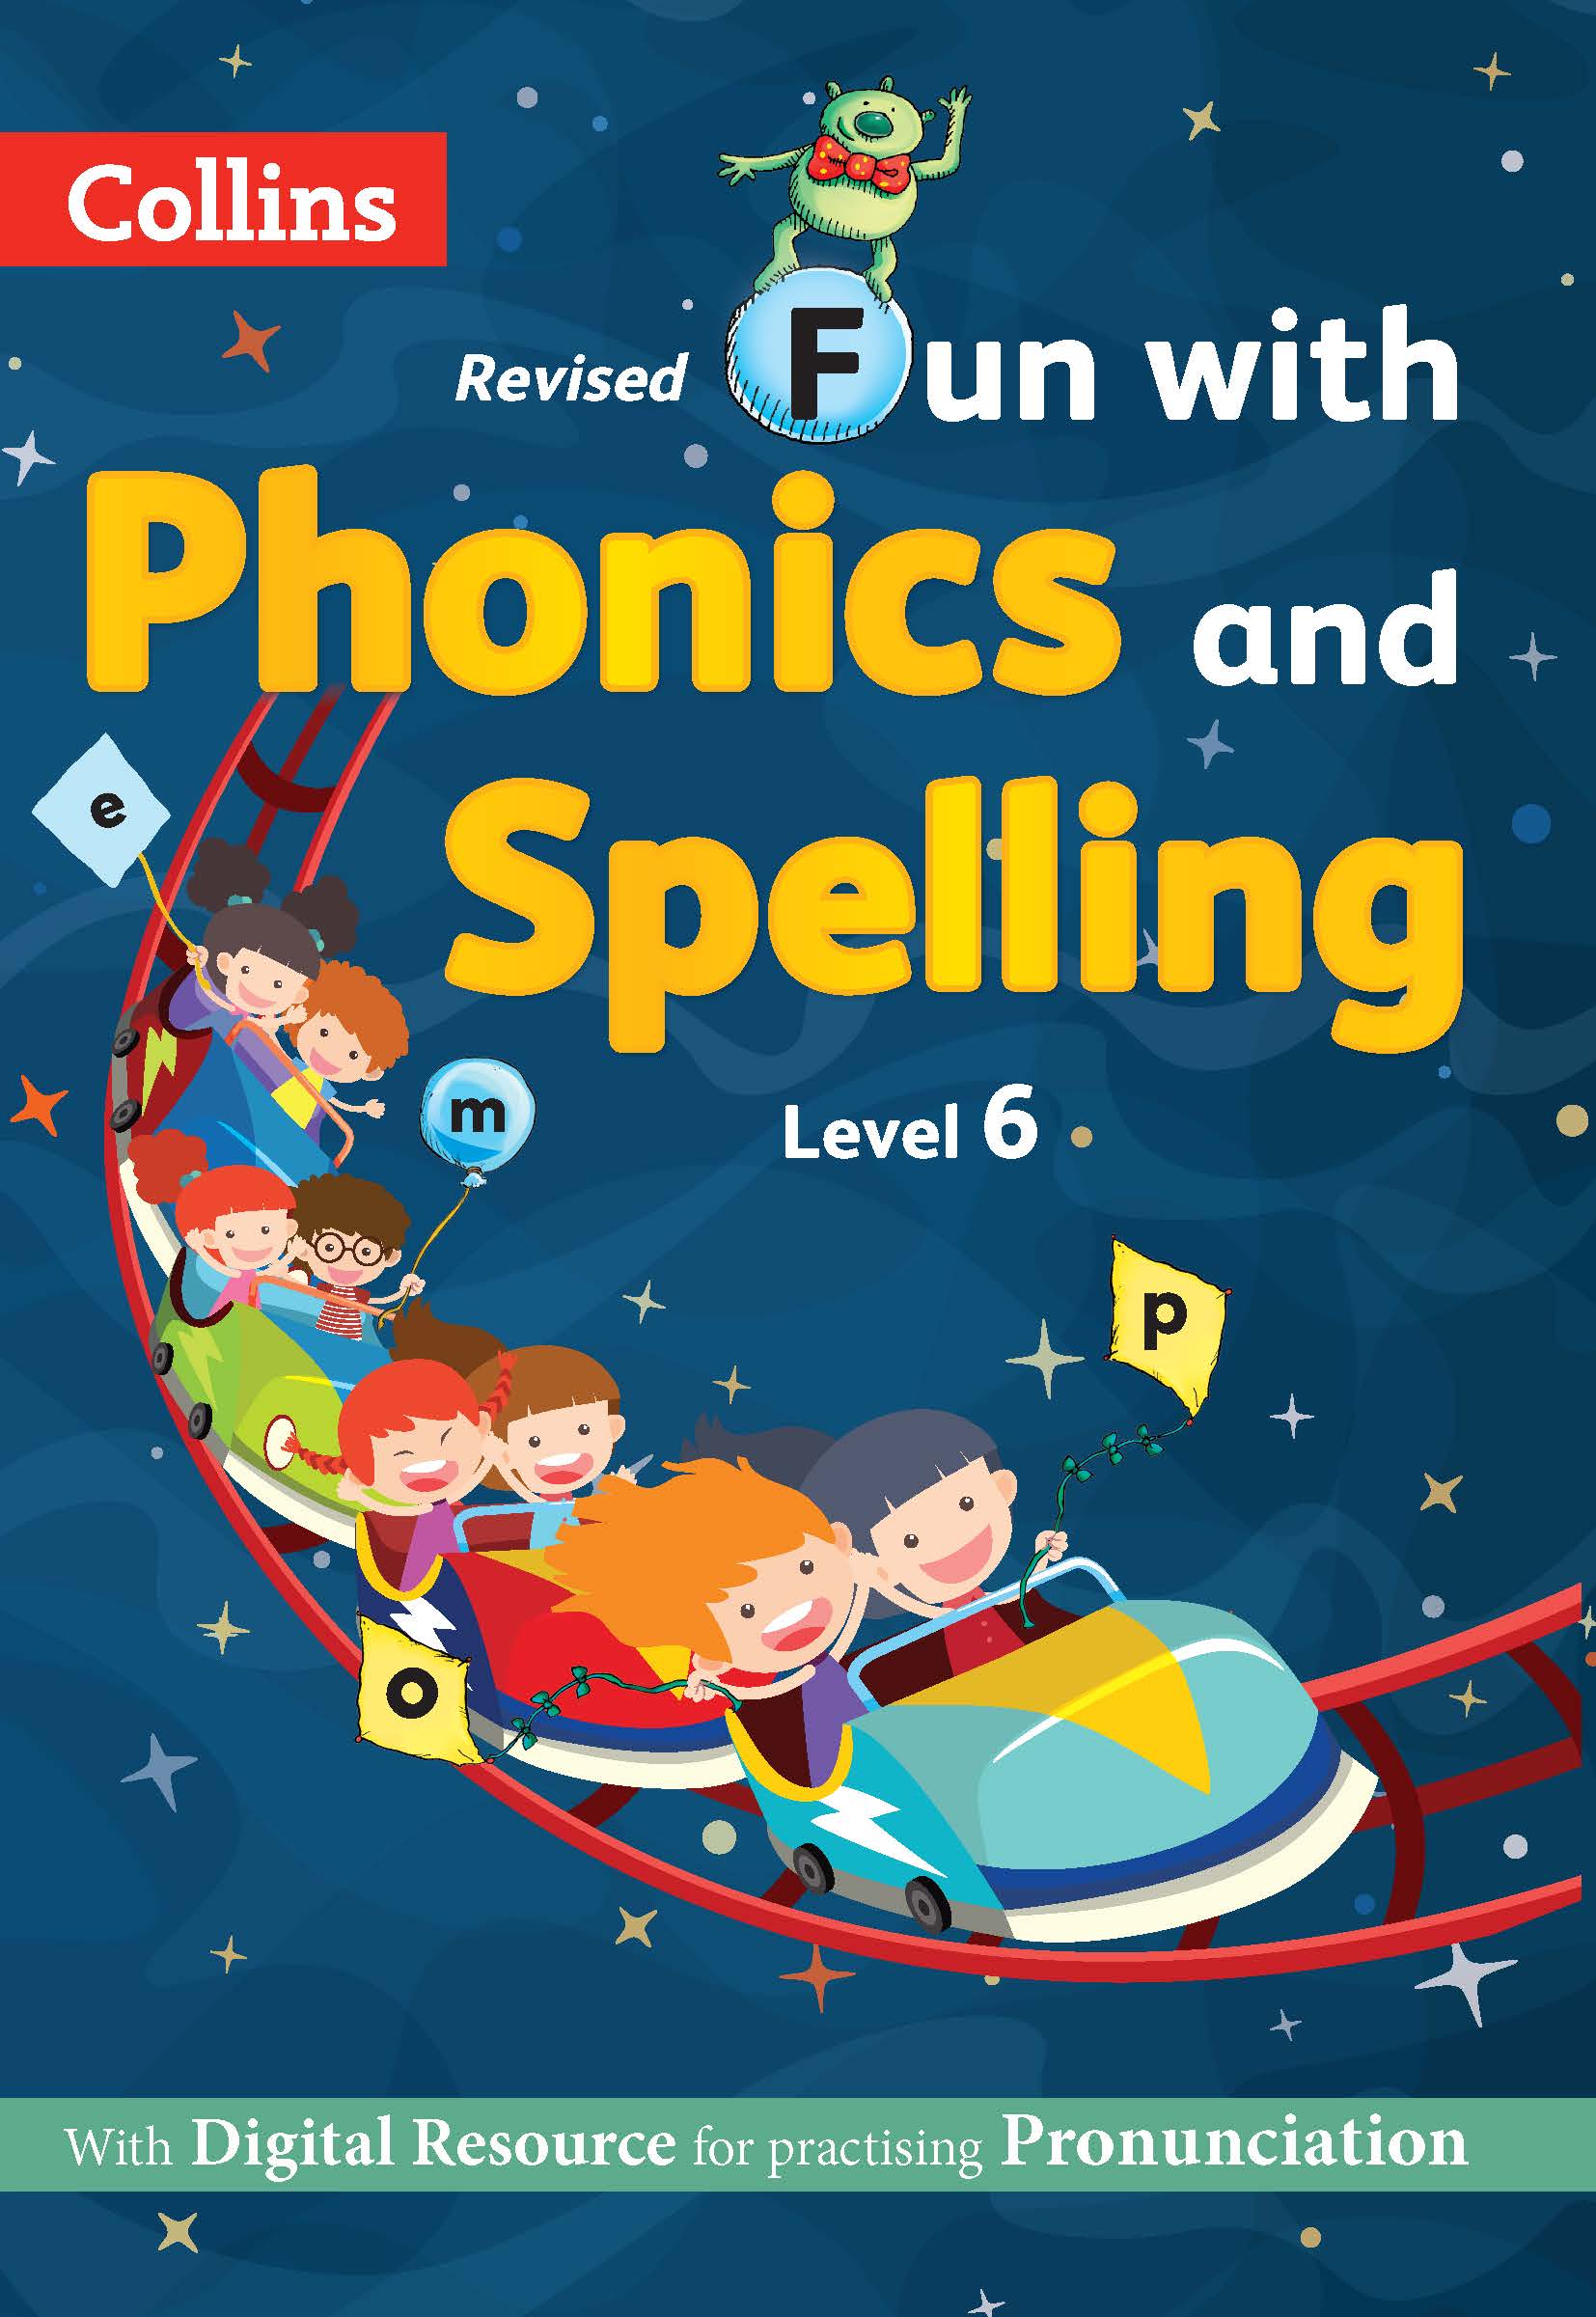 Collins phonics and spelling